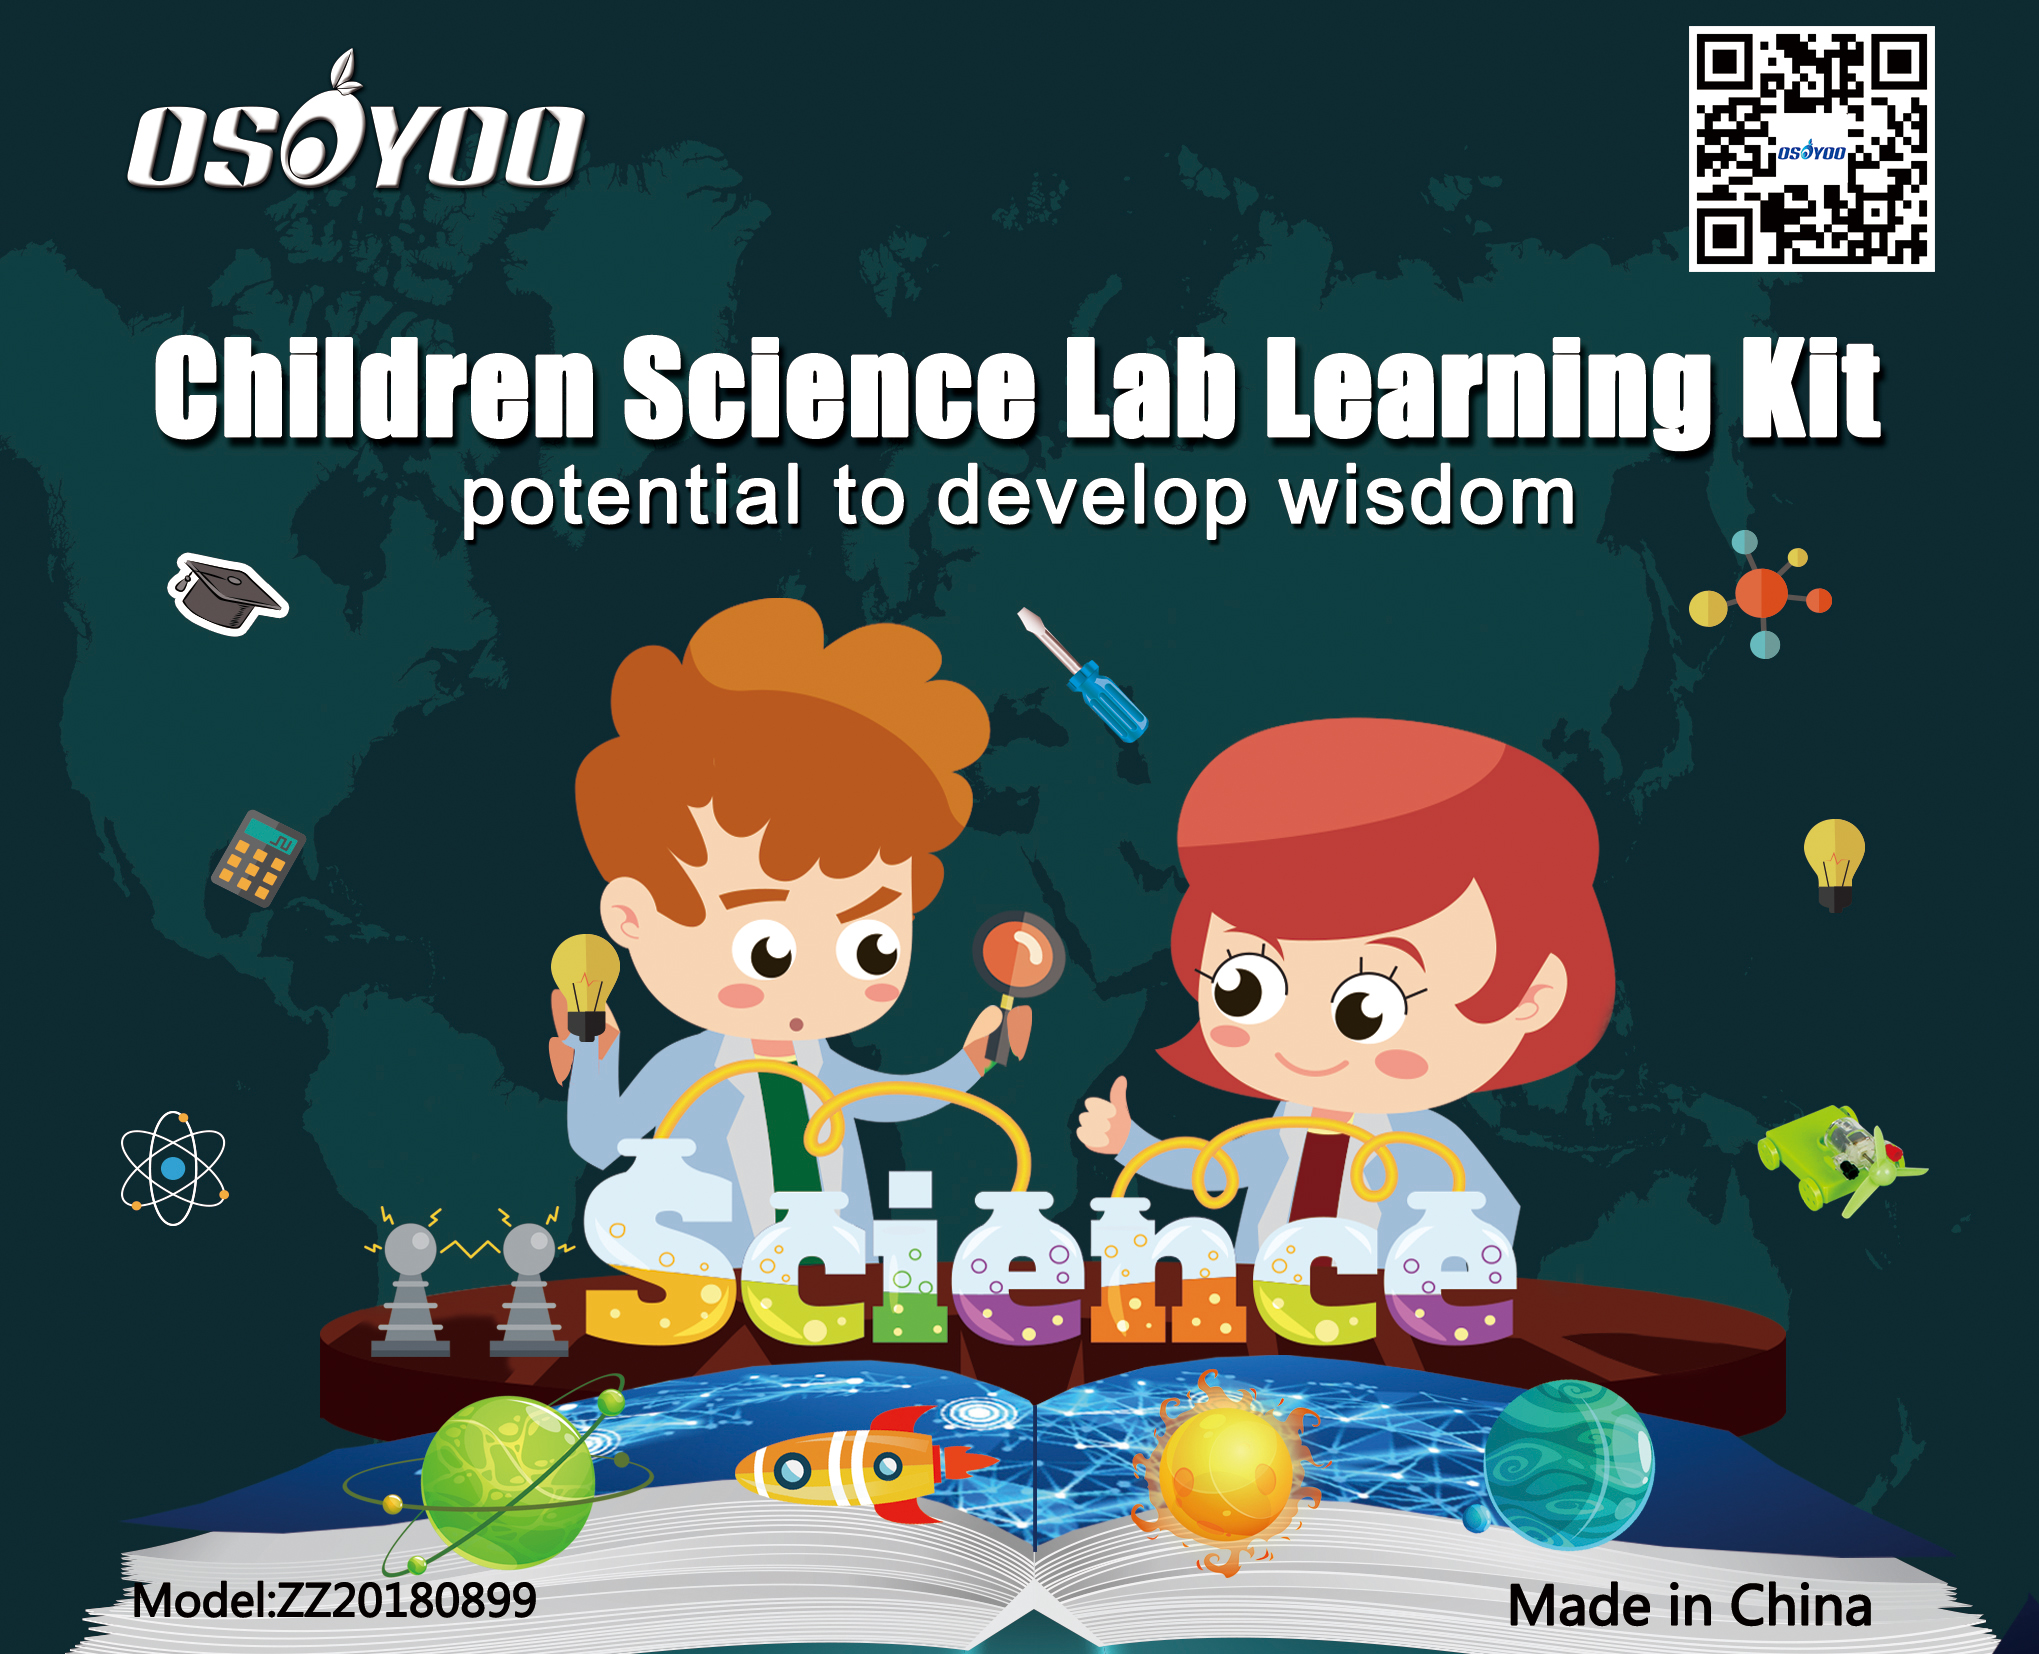 User Manual of Children Science Lab Learning Kit